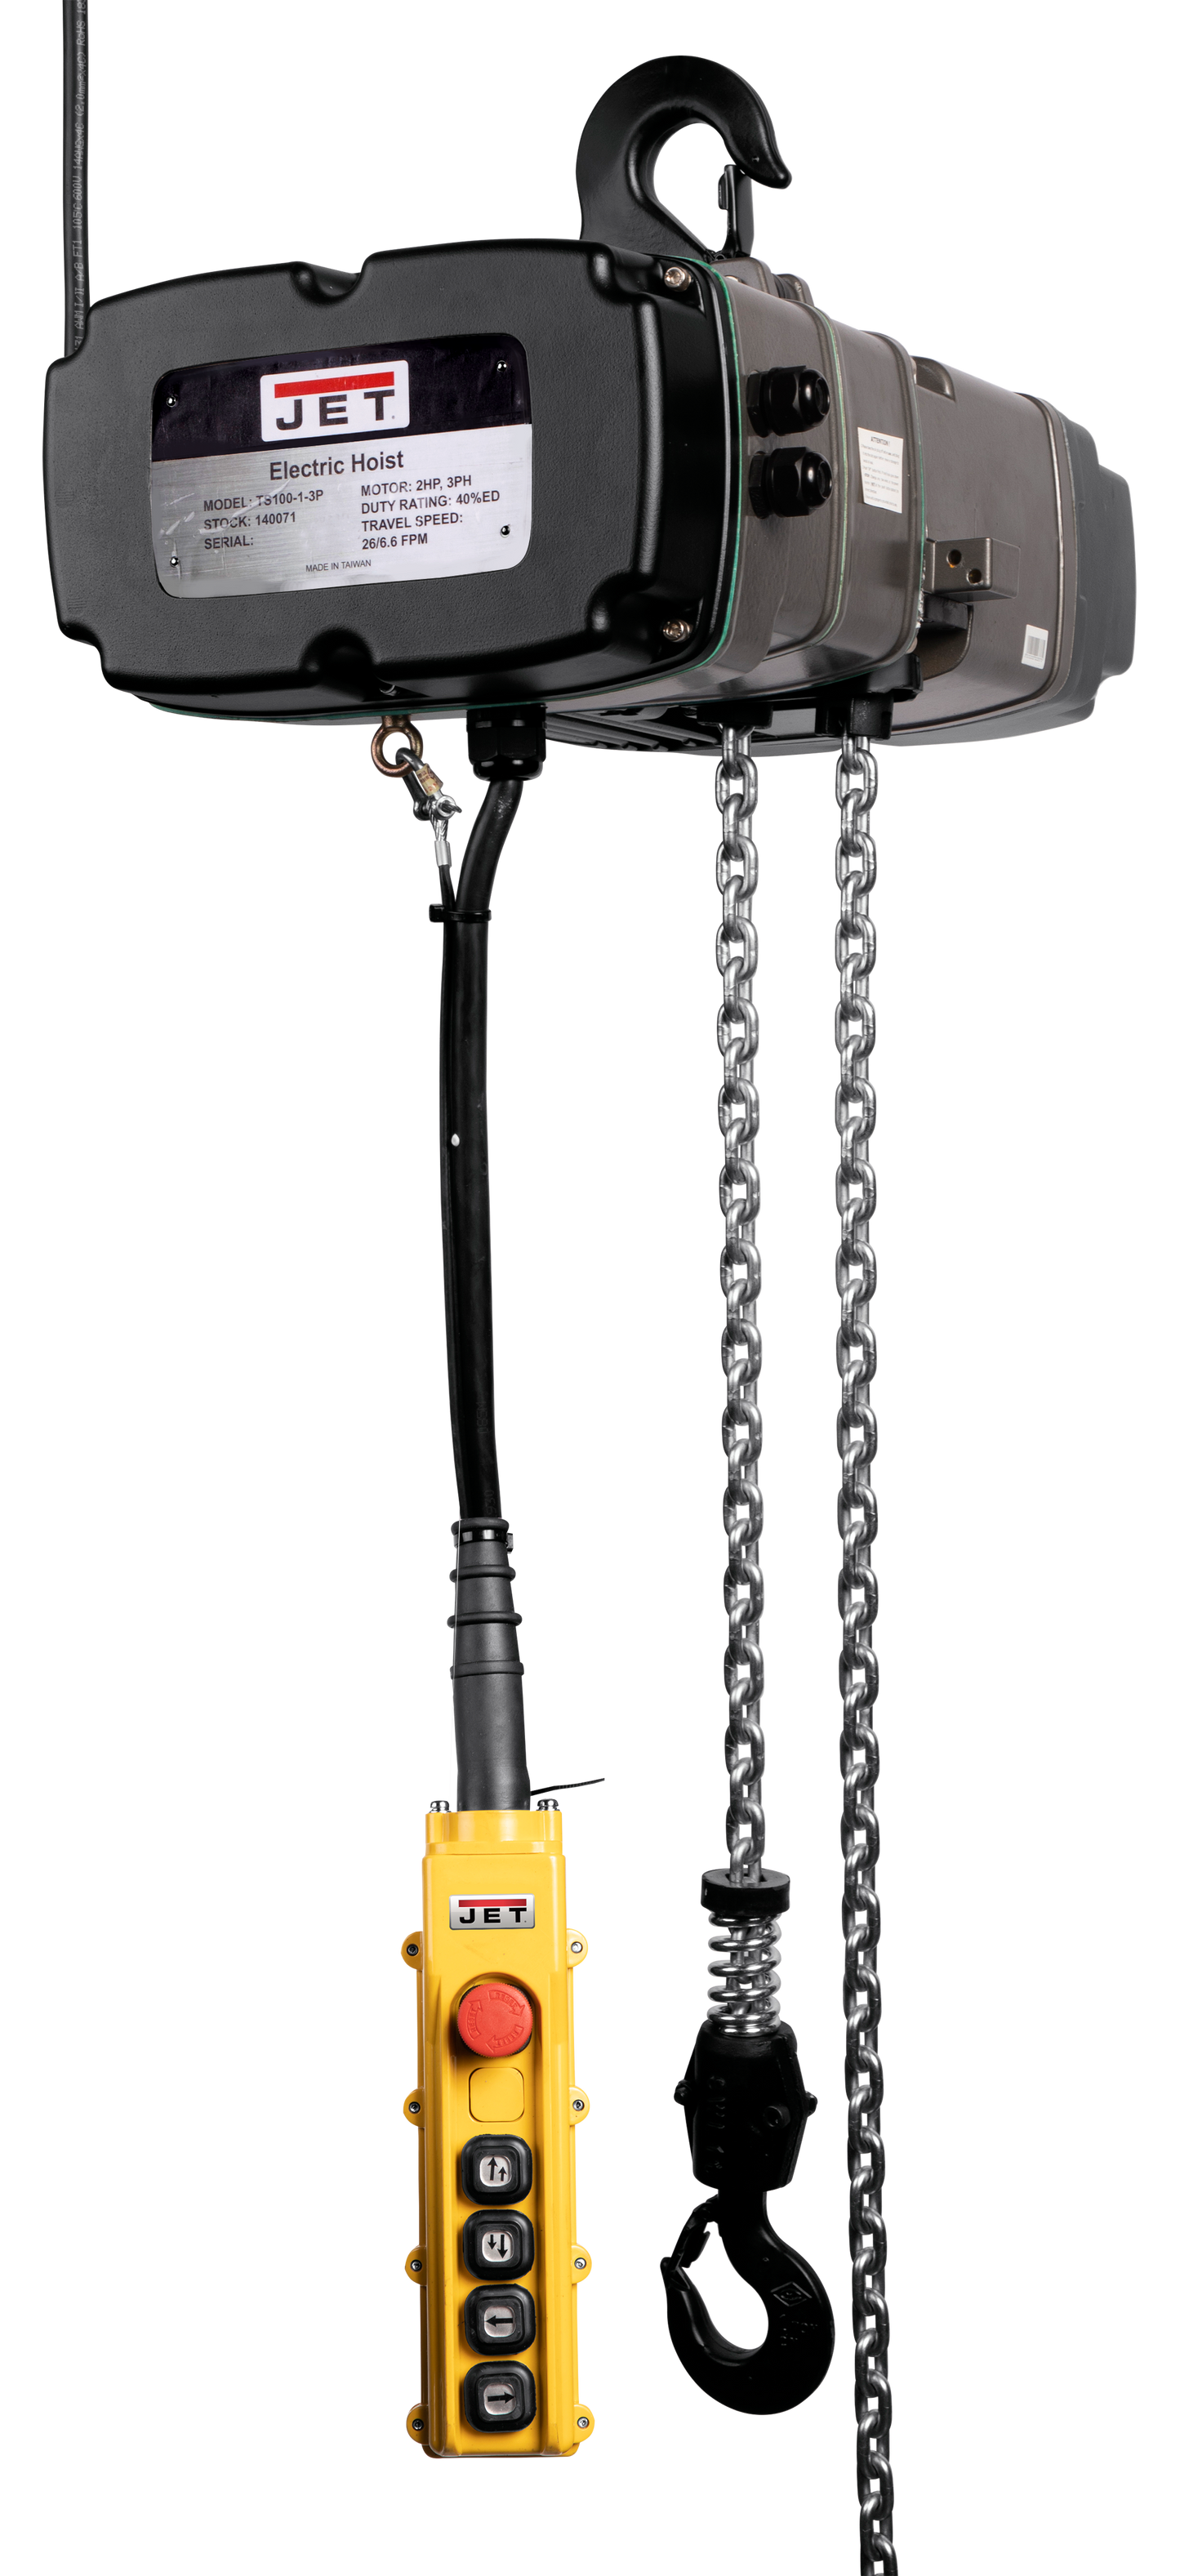 TS300-010 3T Electric Hoist 460V  with Trolley & 4 Button Pendant